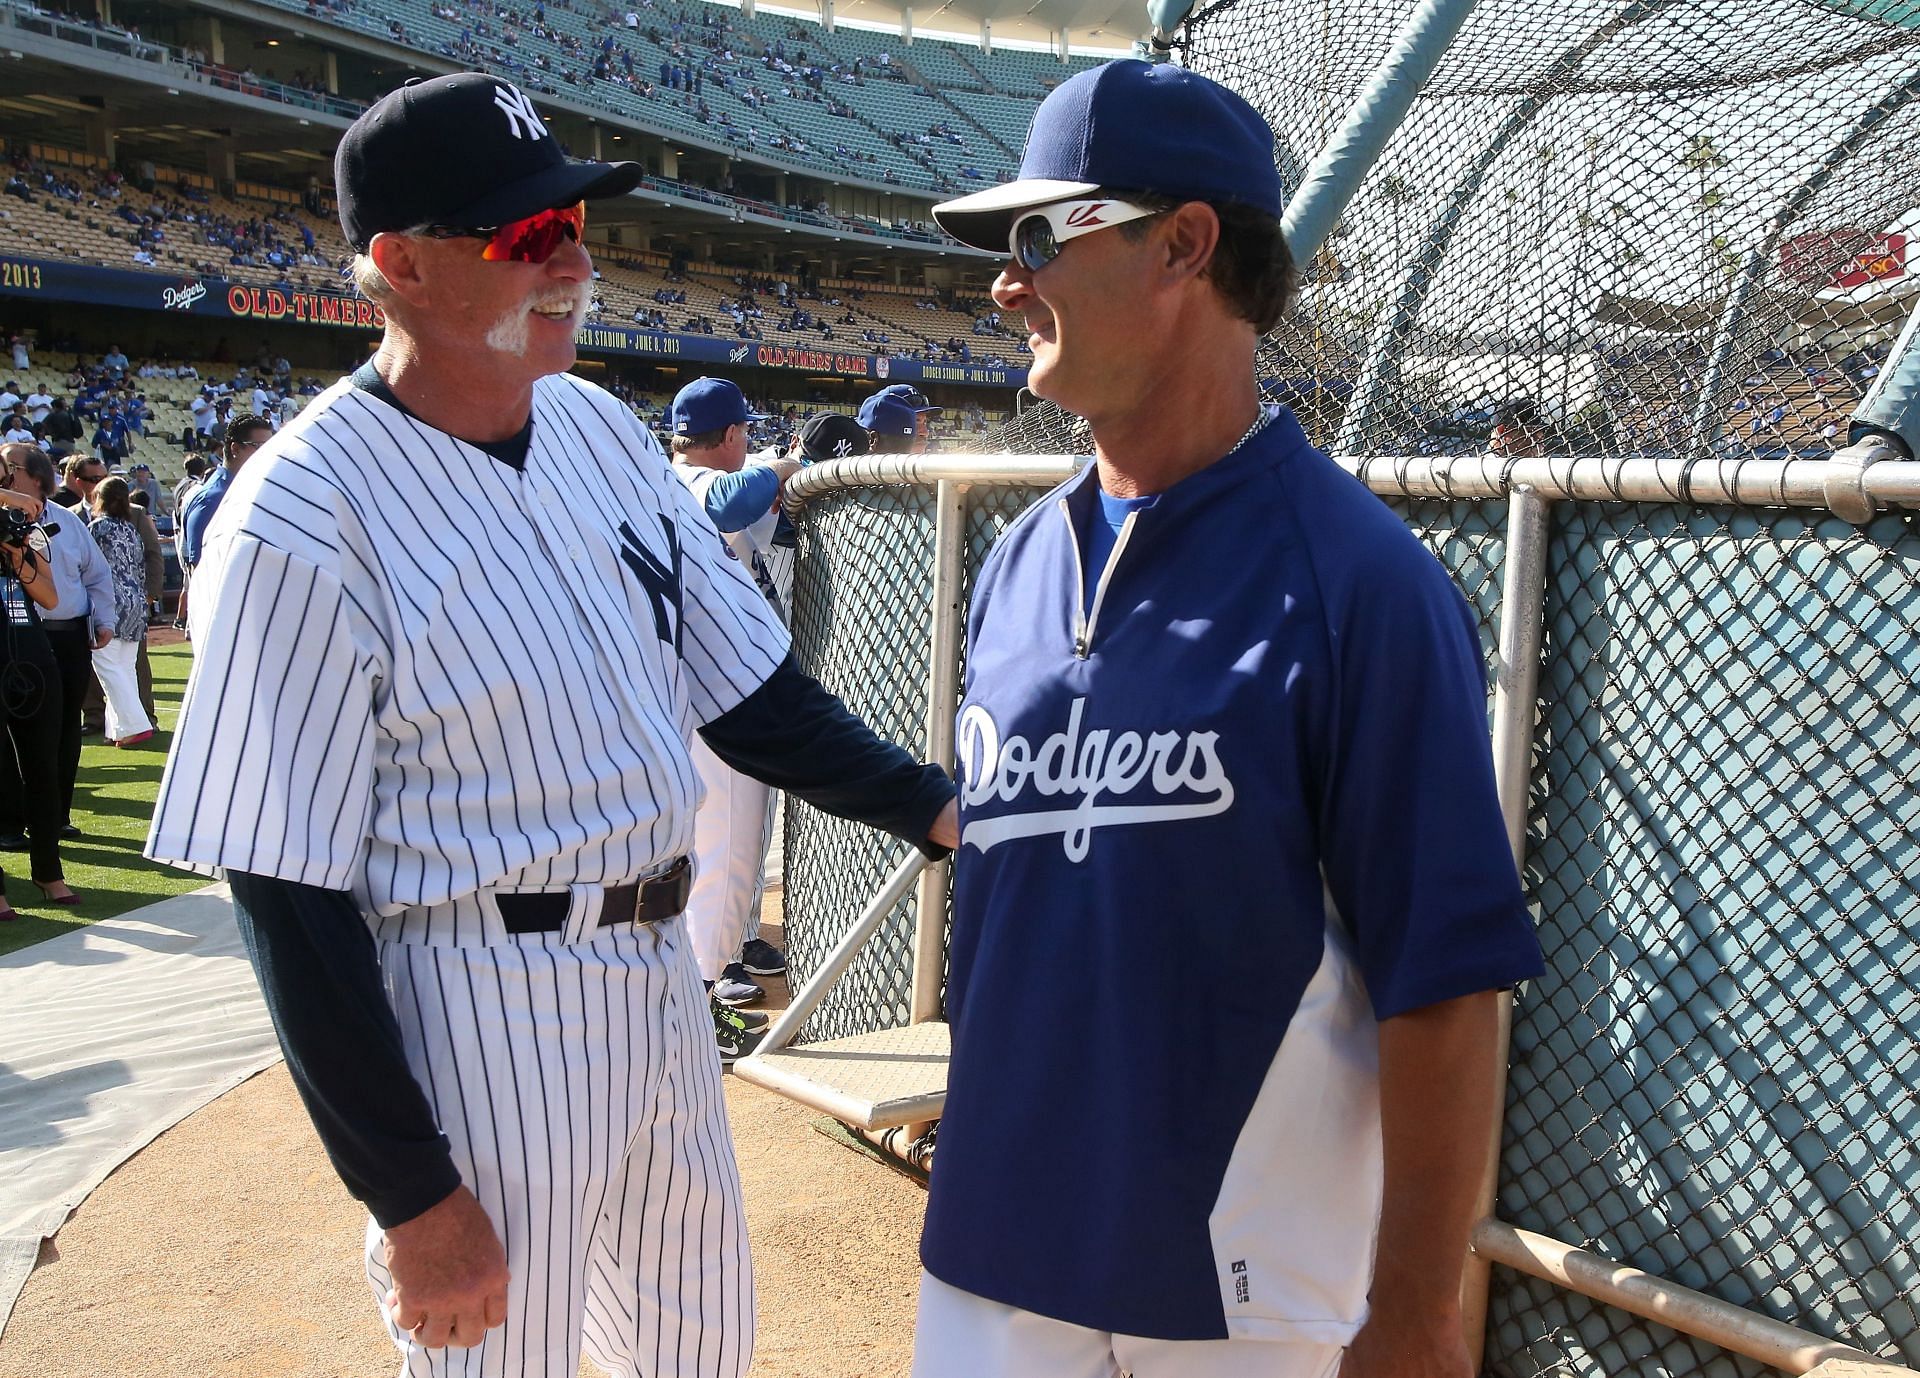 Former Yankees Rich Goose Gossage (L) and Don Mattingly, who is currently the Los Angeles Dodgers manager, talk before an Old Timers game